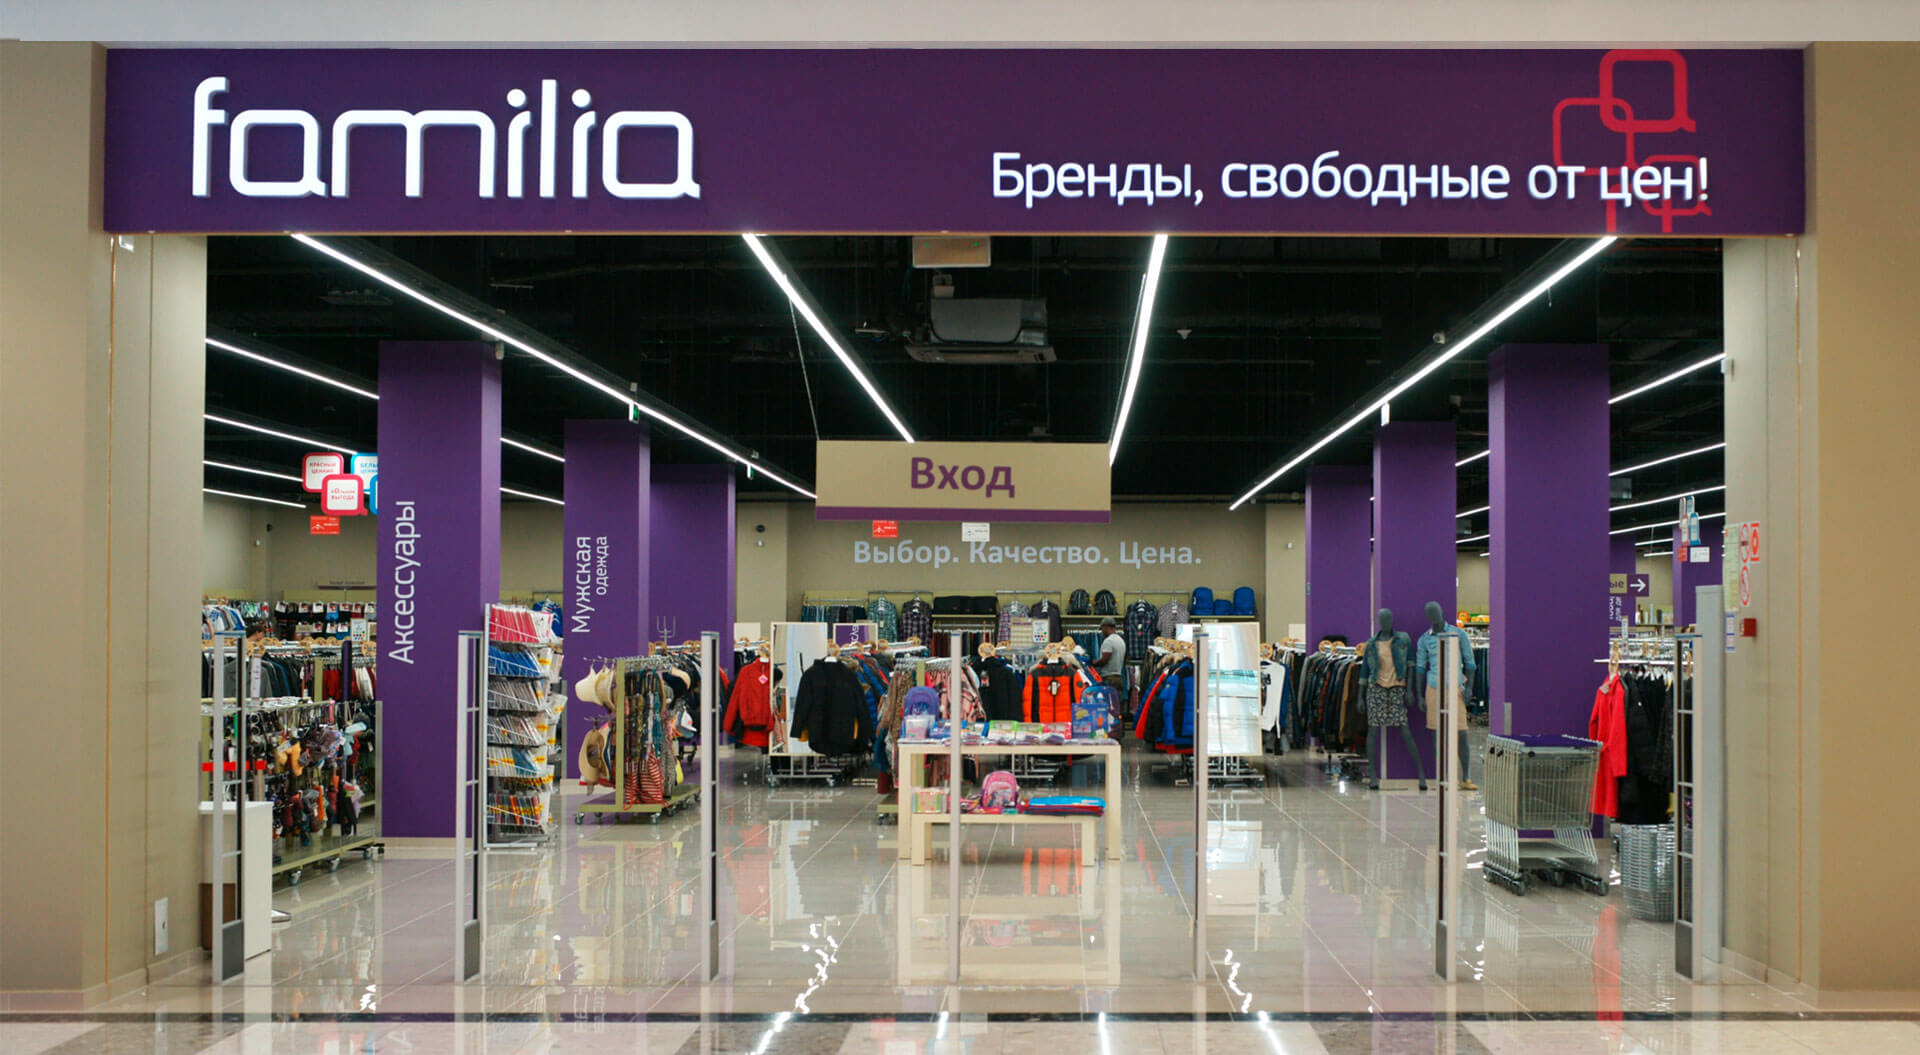 Innovative corporate brand identity, best store interior design agency, fashion retail, integrated marketing and communications strategy - Familia Russia